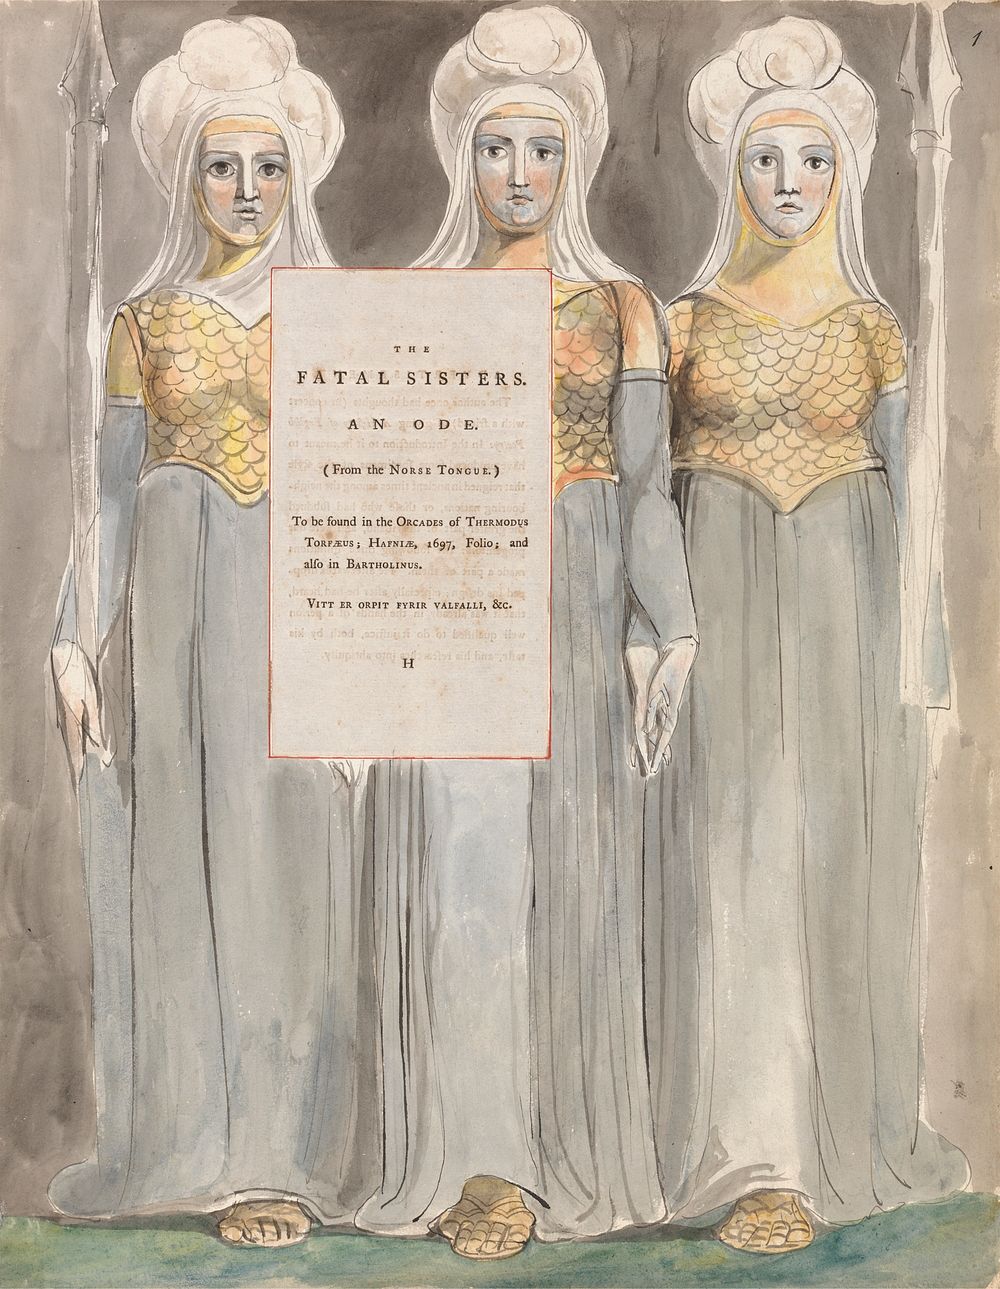 The Poems of Thomas Gray, Design 67, "The Fatal Sisters." by William Blake. Original public domain image from Yale Center…